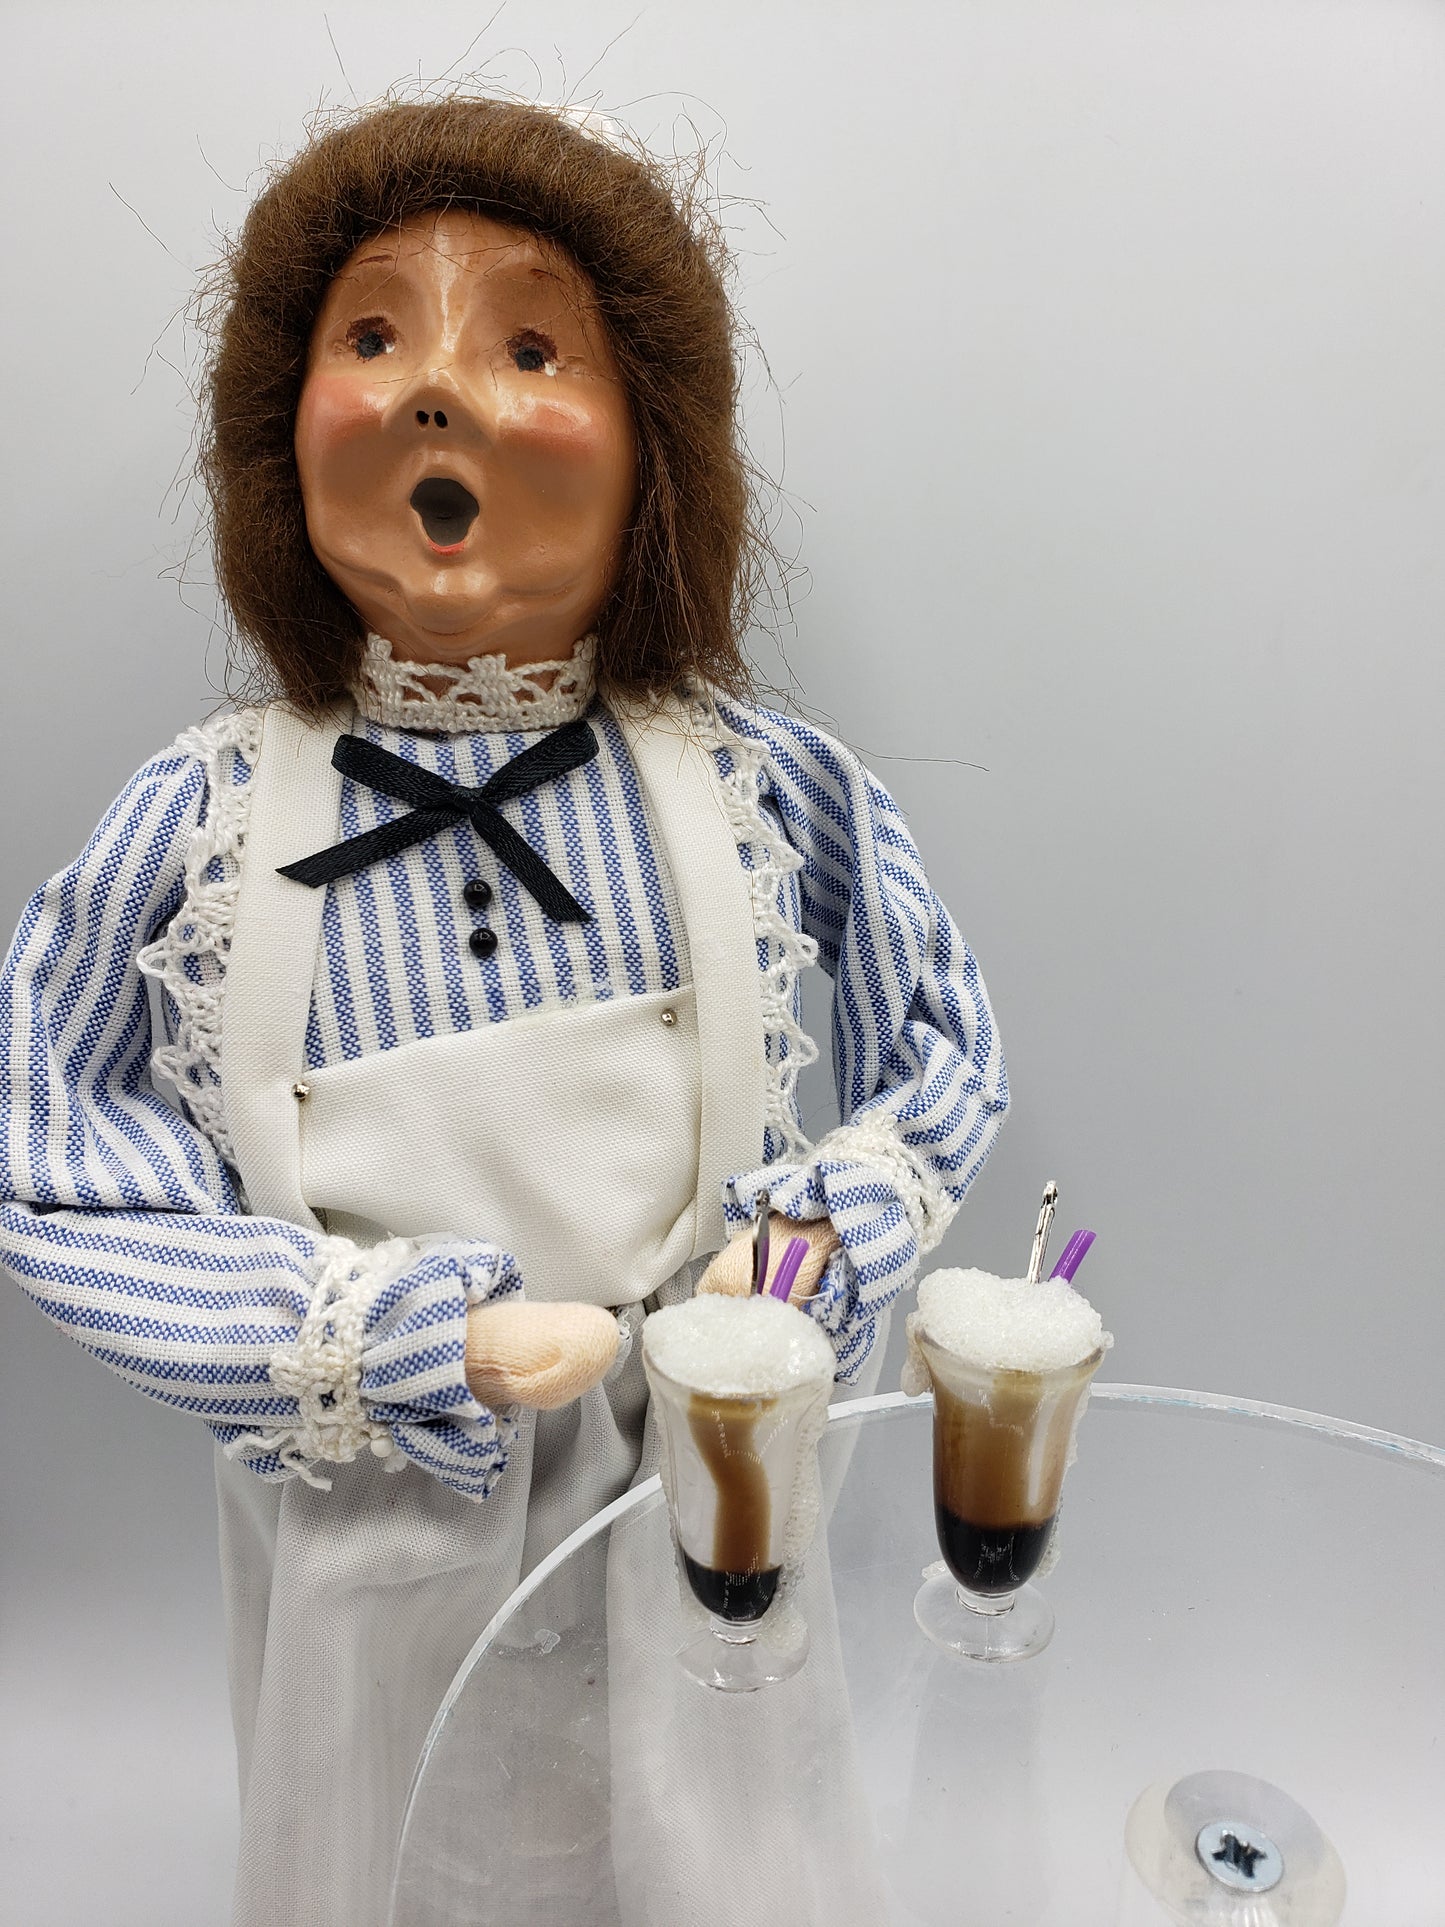 Root Beer Floats for Fashion Dolls